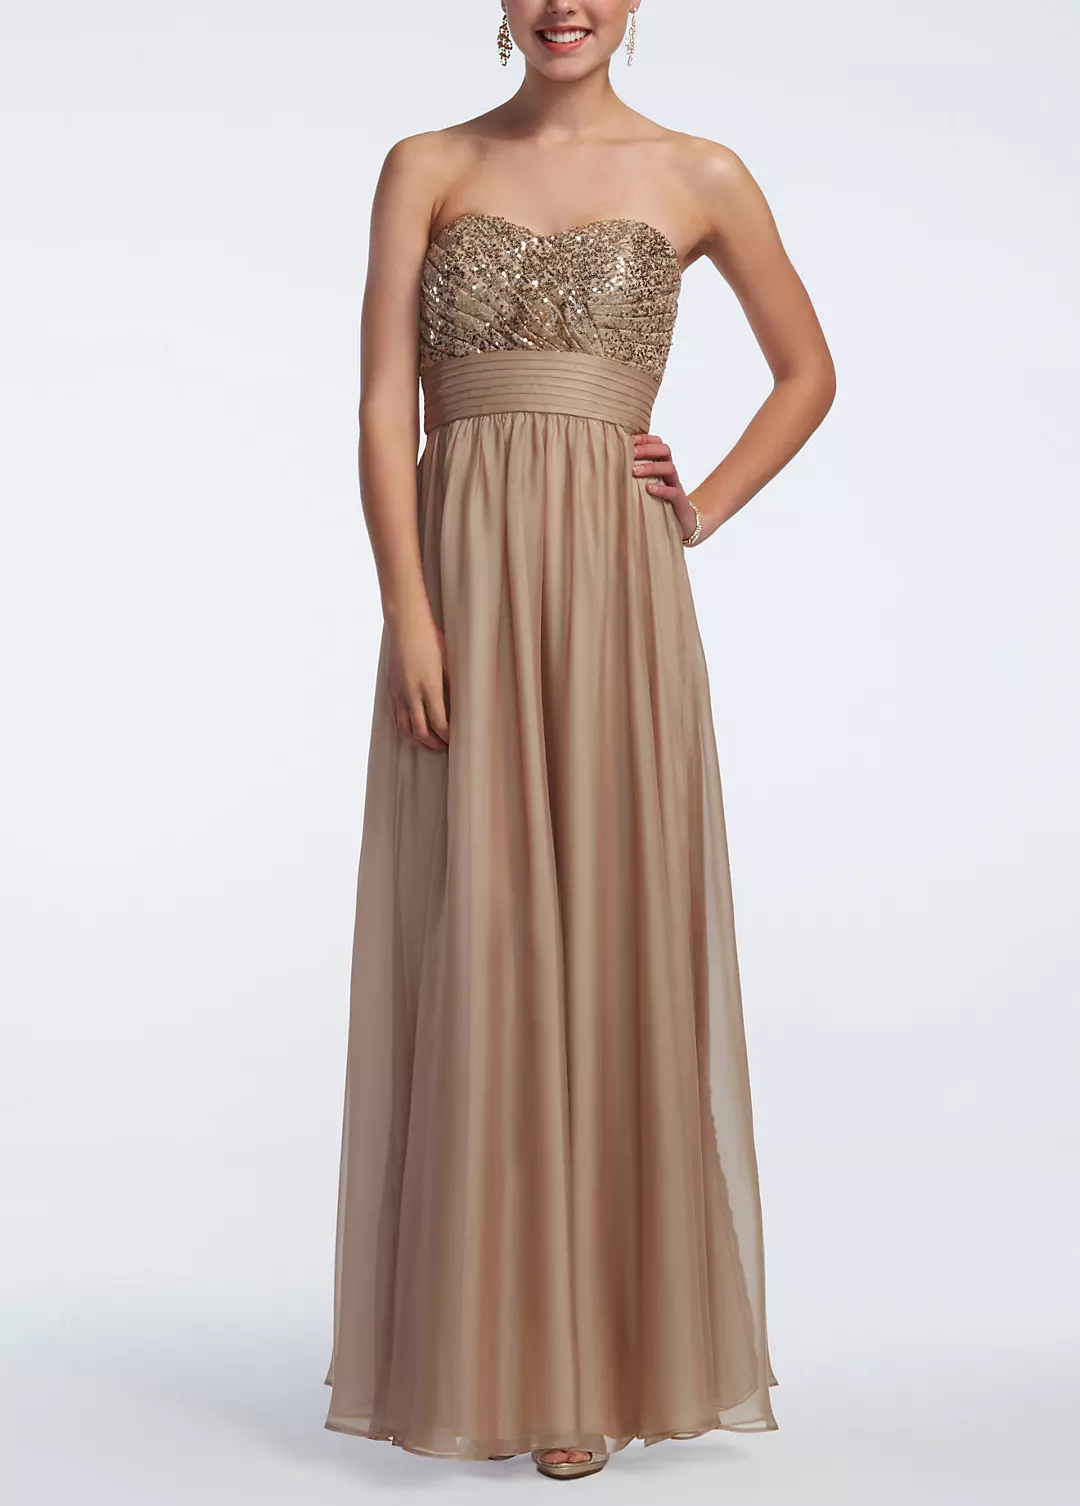 Strapless Chiffon Prom Dress with Sequin Bodice Image